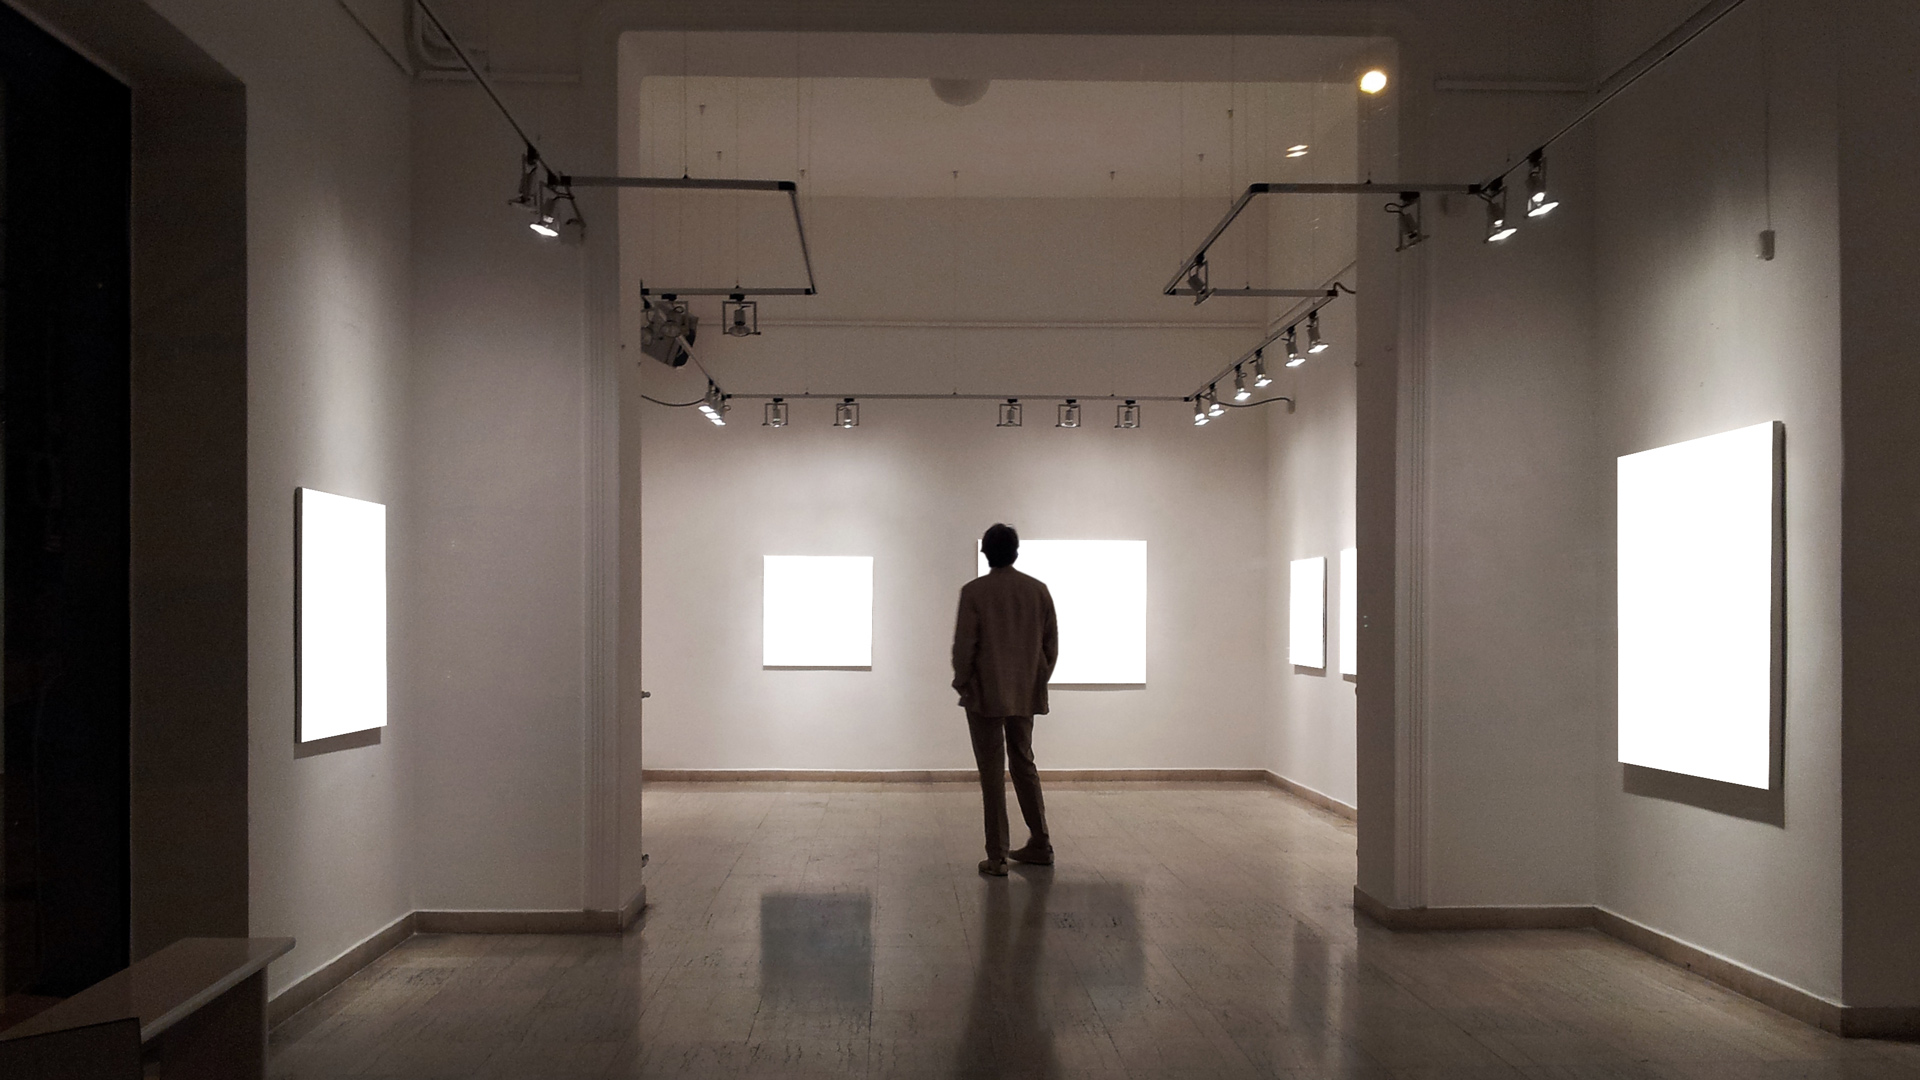 Man in shadow in darkened gallery with empty canvases